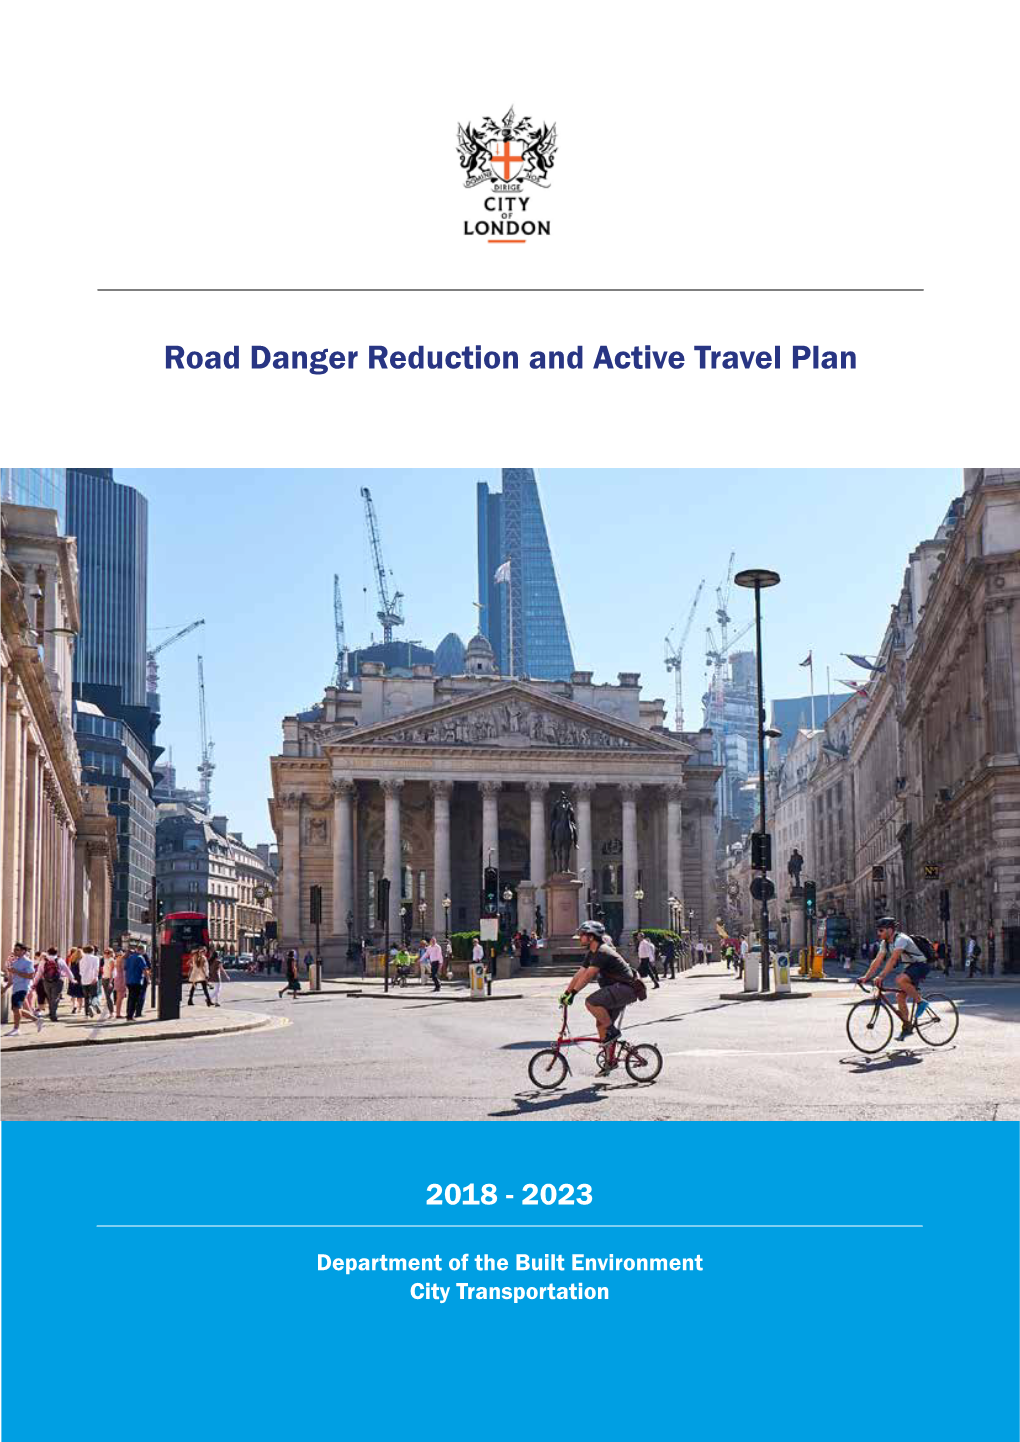 Road Danger Reduction and Active Travel Plan